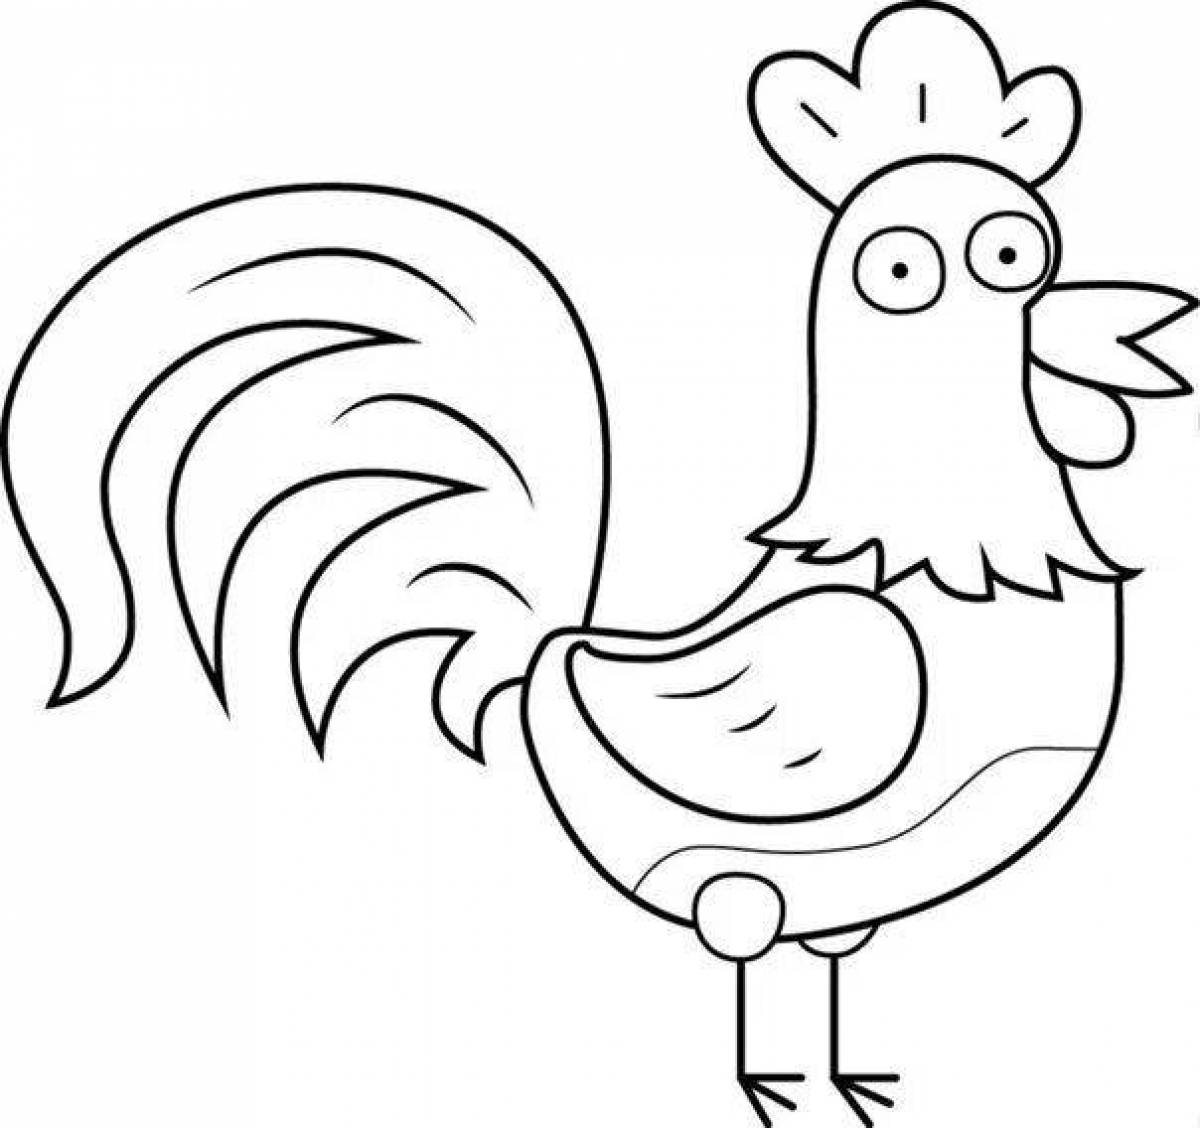 Coloring page funny cow